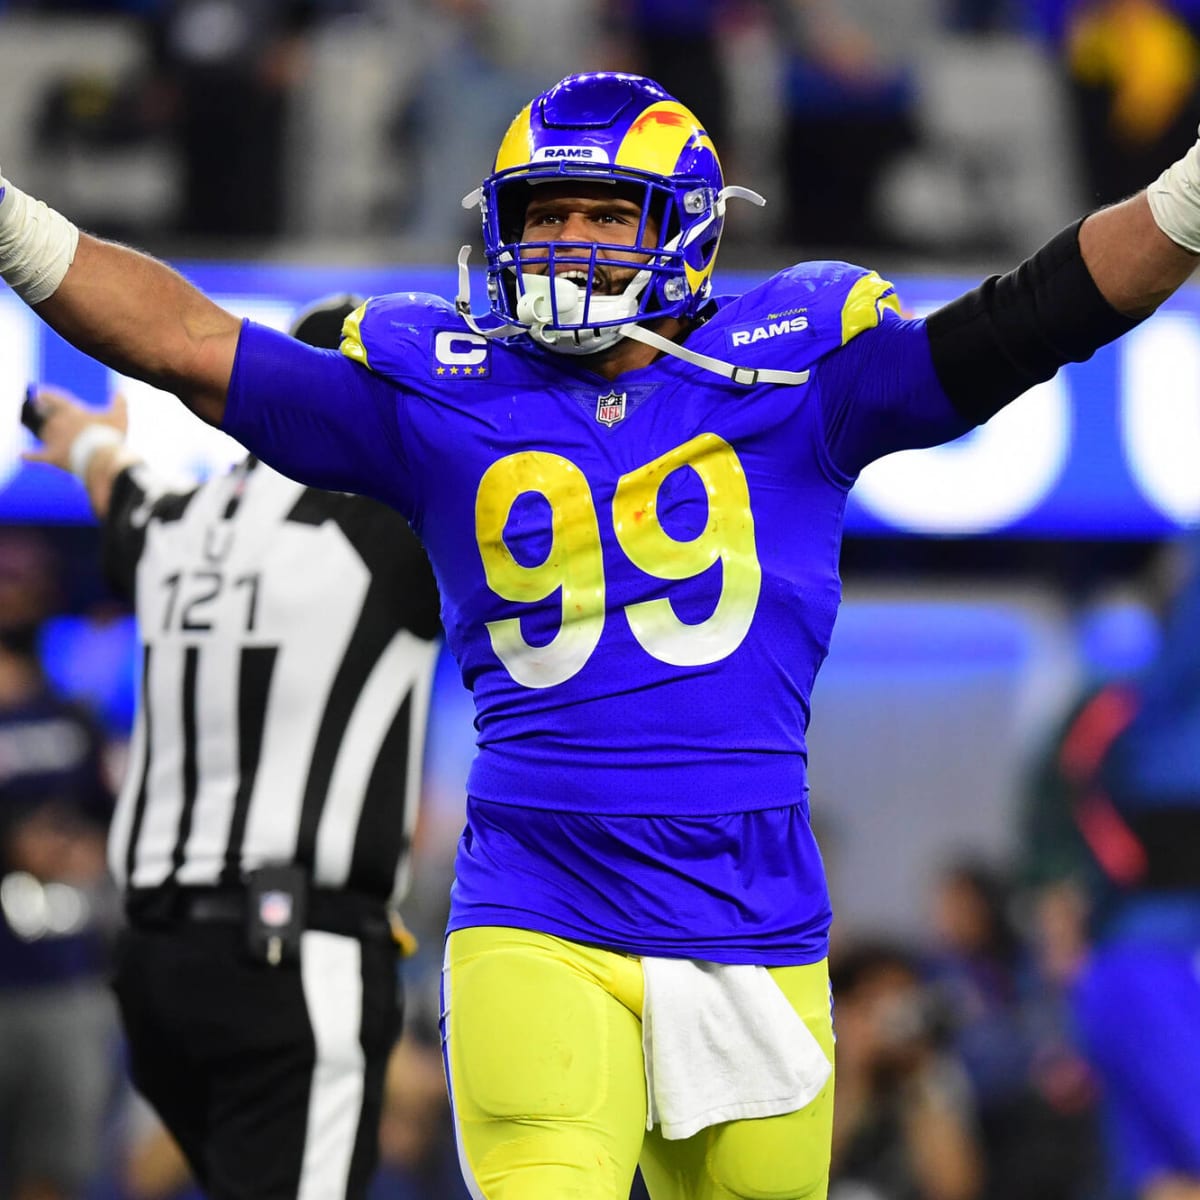 Making the case for betting on Aaron Donald to win SB MVP